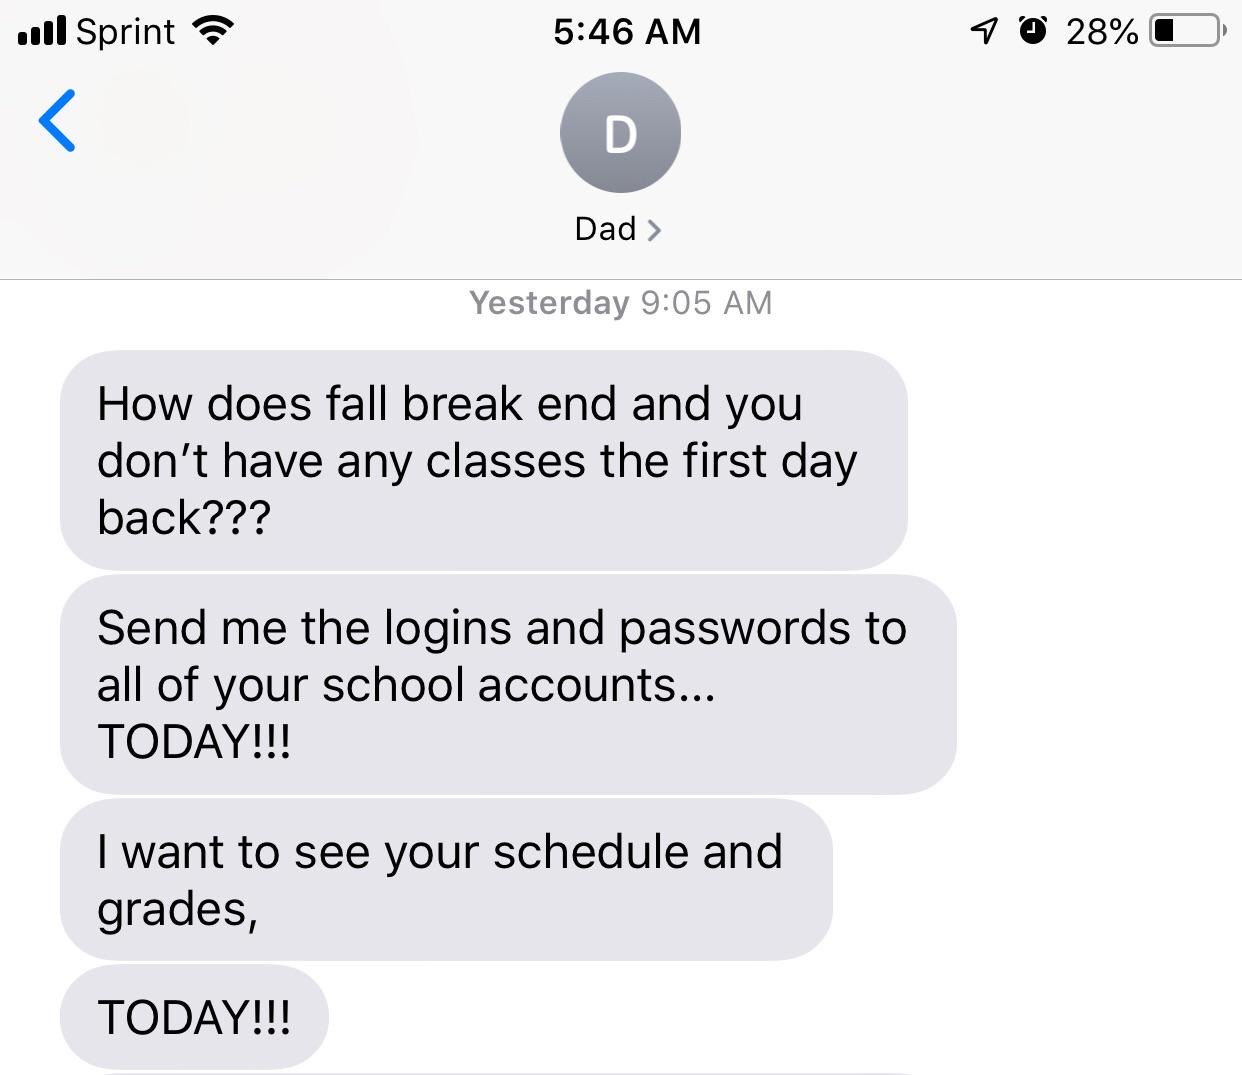 r insaneparents grades - ul Sprint 90 28%O D Dad > Yesterday How does fall break end and you don't have any classes the first day back??? Send me the logins and passwords to all of your school accounts... Today!!! I want to see your schedule and grades, T